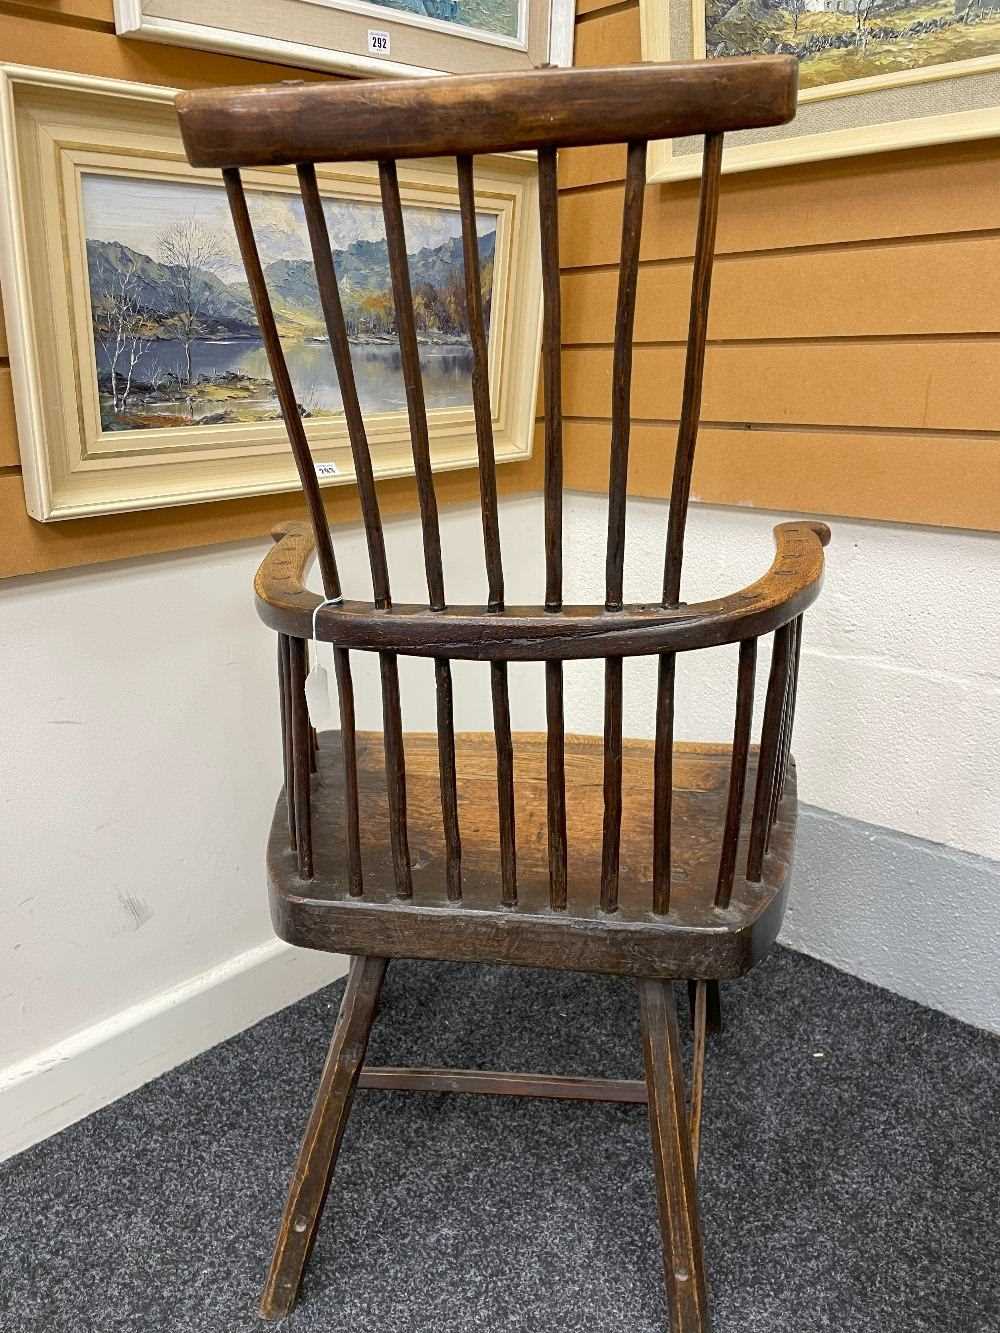 WELSH OAK & ASH COMB-BACK ARMCHAIR late 18th Century, Cardiganshire, the back of seven spindles - Image 12 of 50